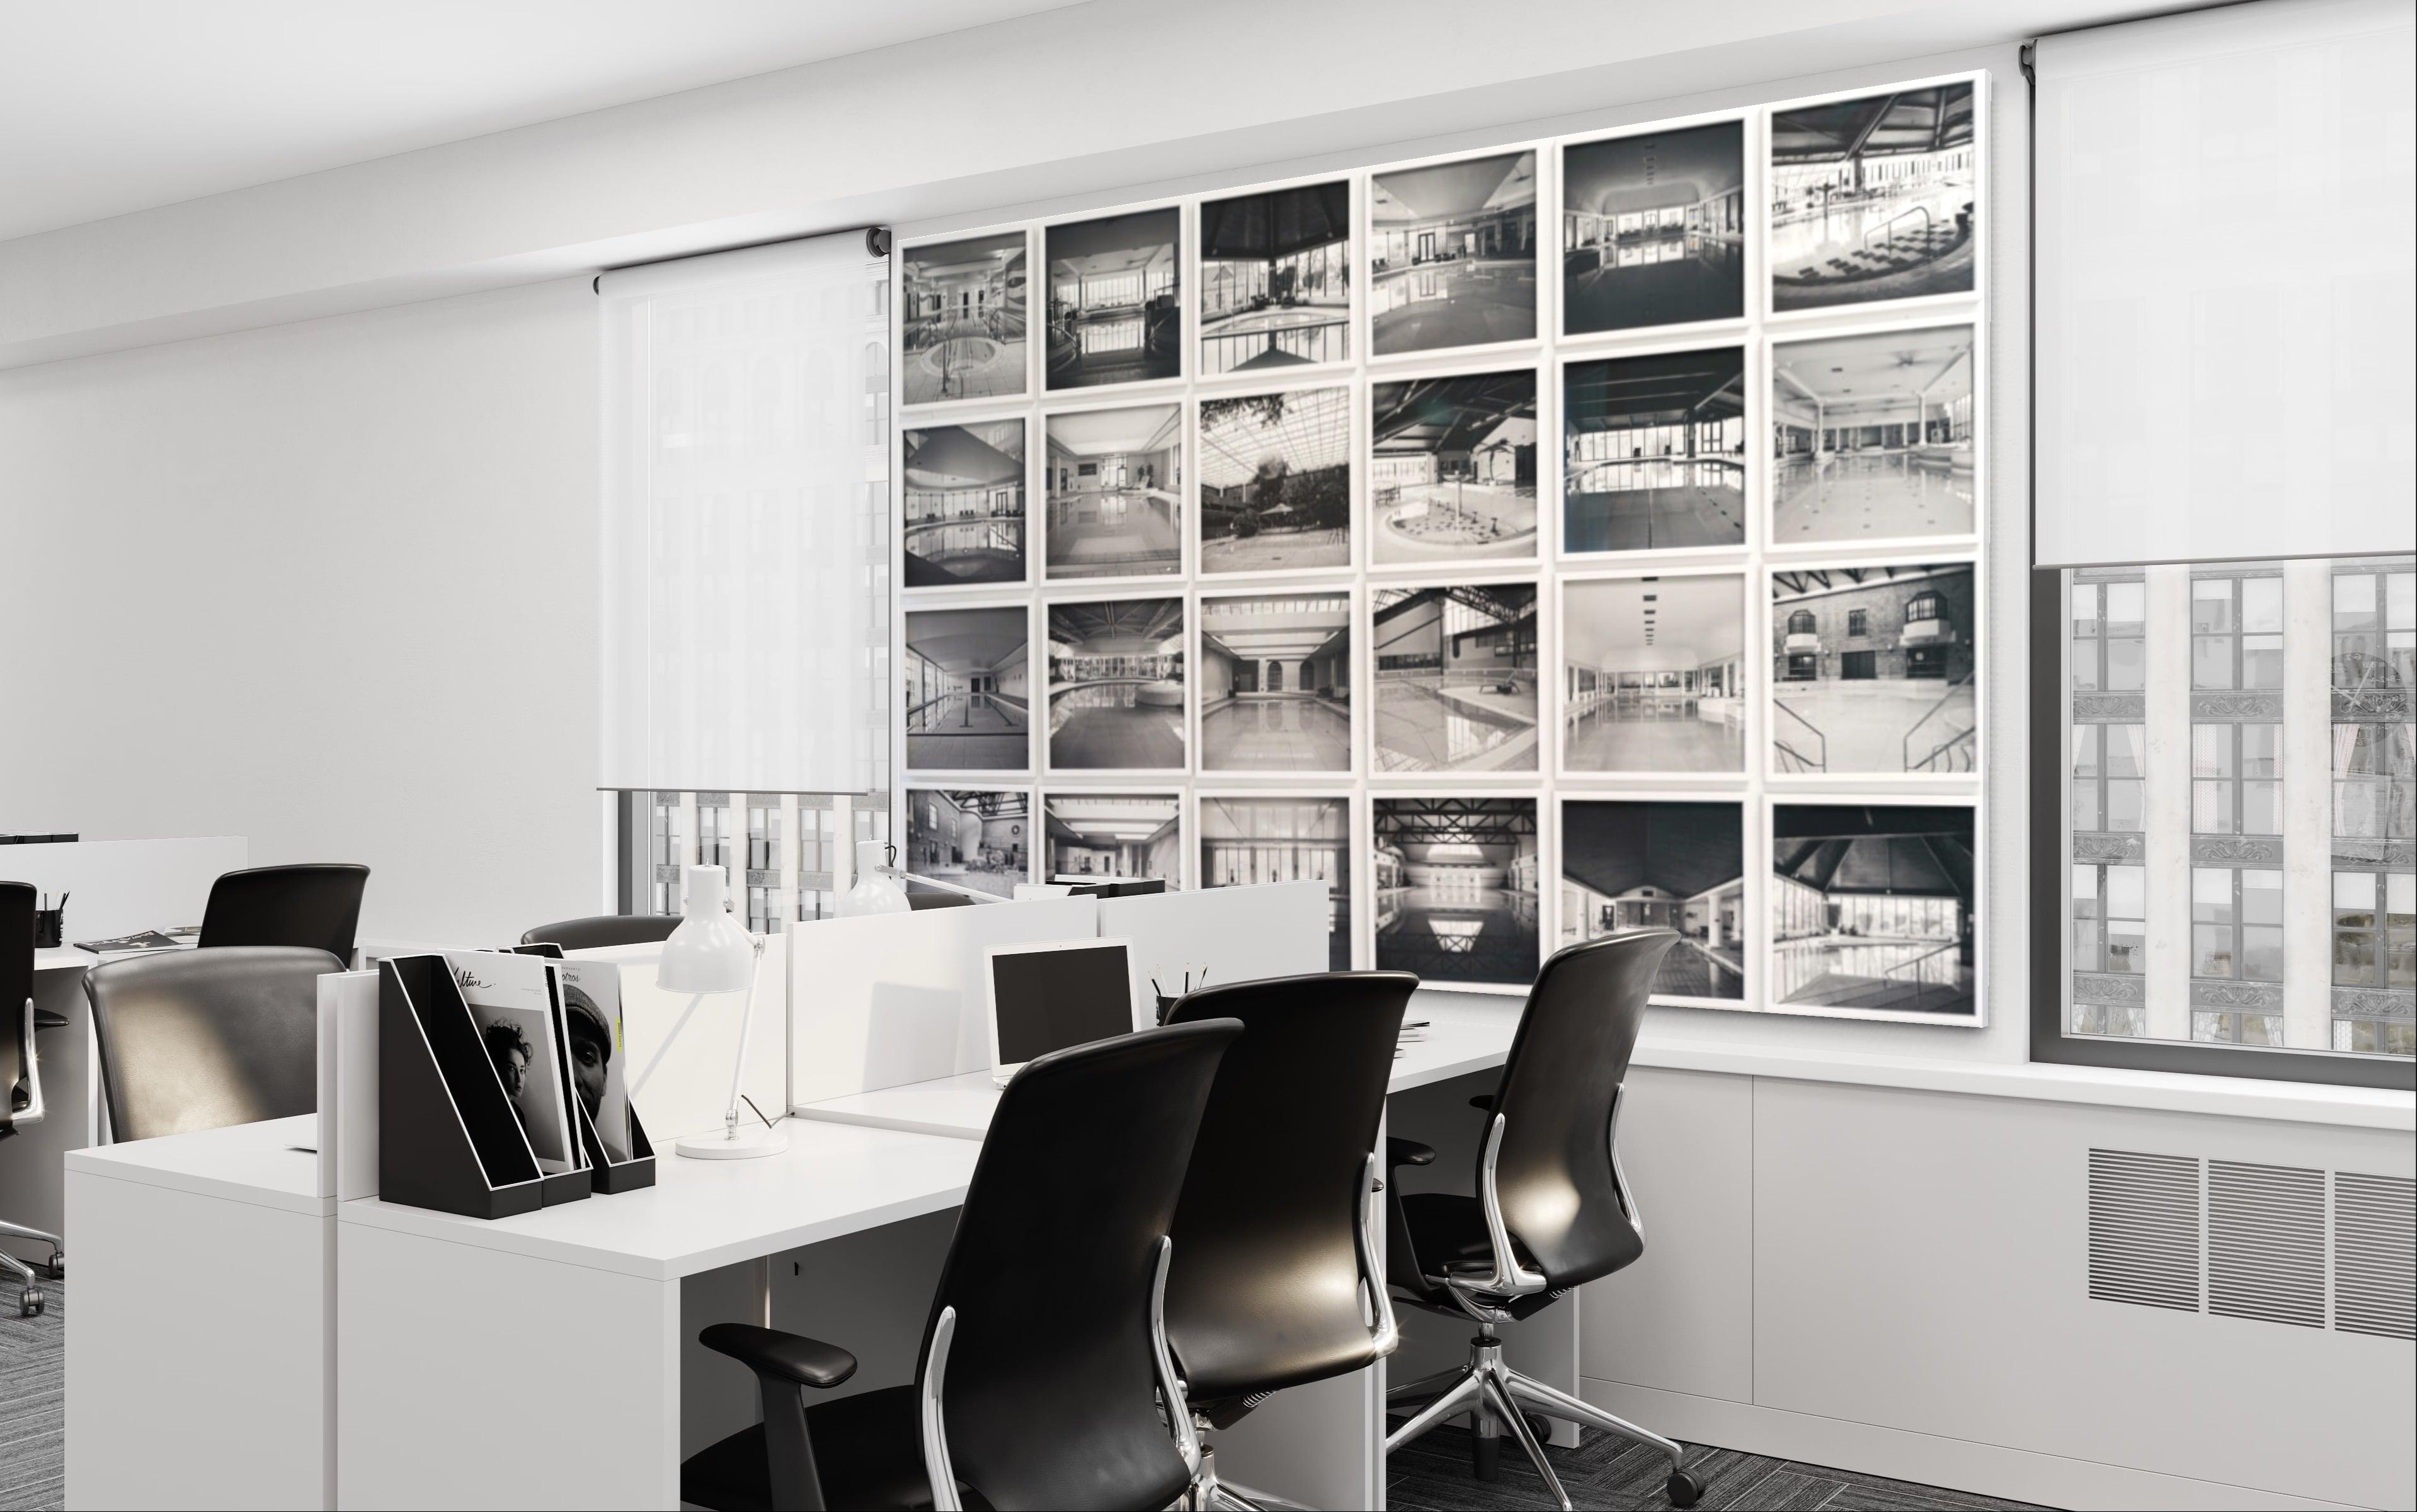 Large panel of black and white architecture photos by Anna Dobrovolskaya-Mints. 2